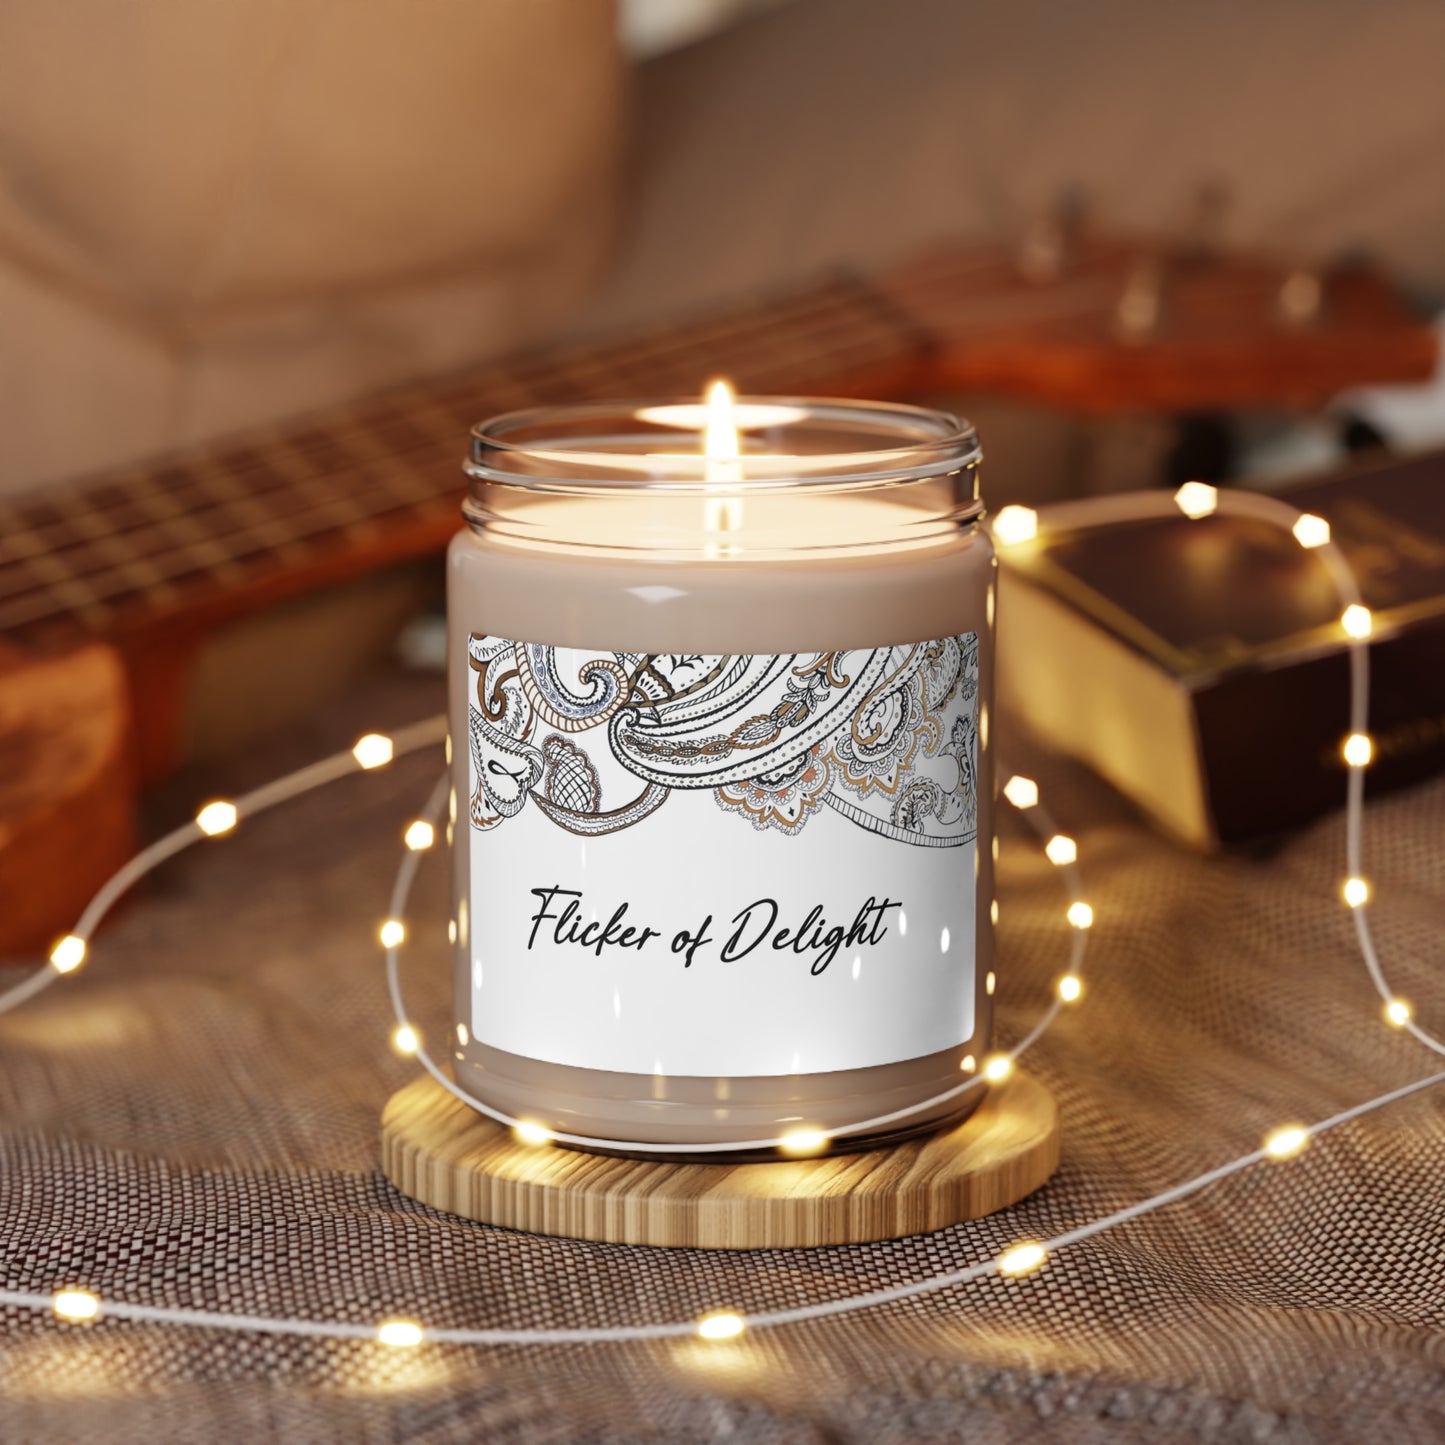 Scented Soy Candle "Flicker of Delight"